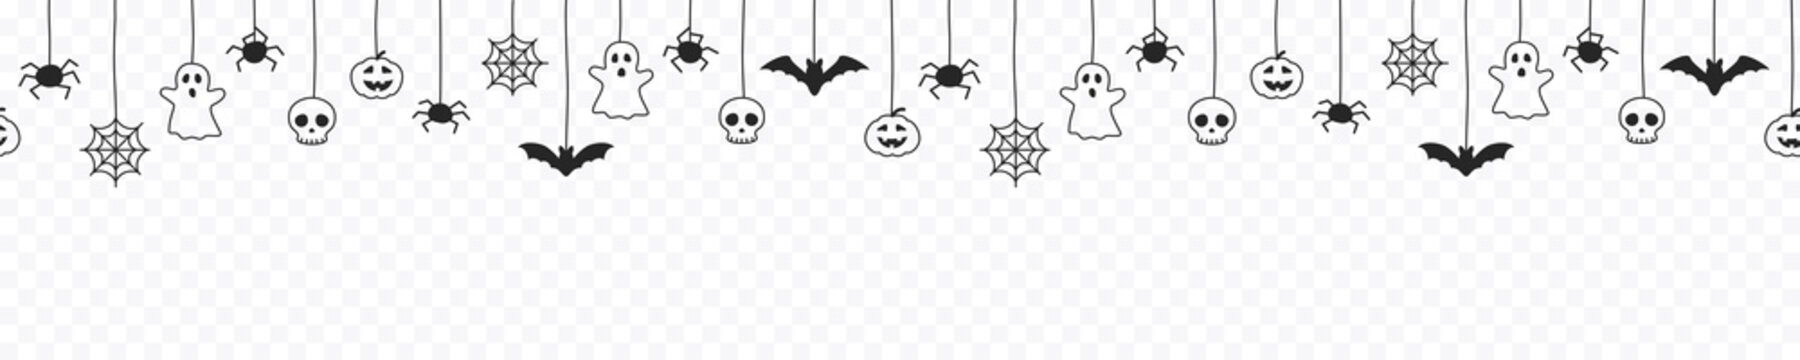 Happy Halloween seamless banner or border with black bats, spider web, ghost and pumpkins. Vector illustration party invitation isolated on transparent background